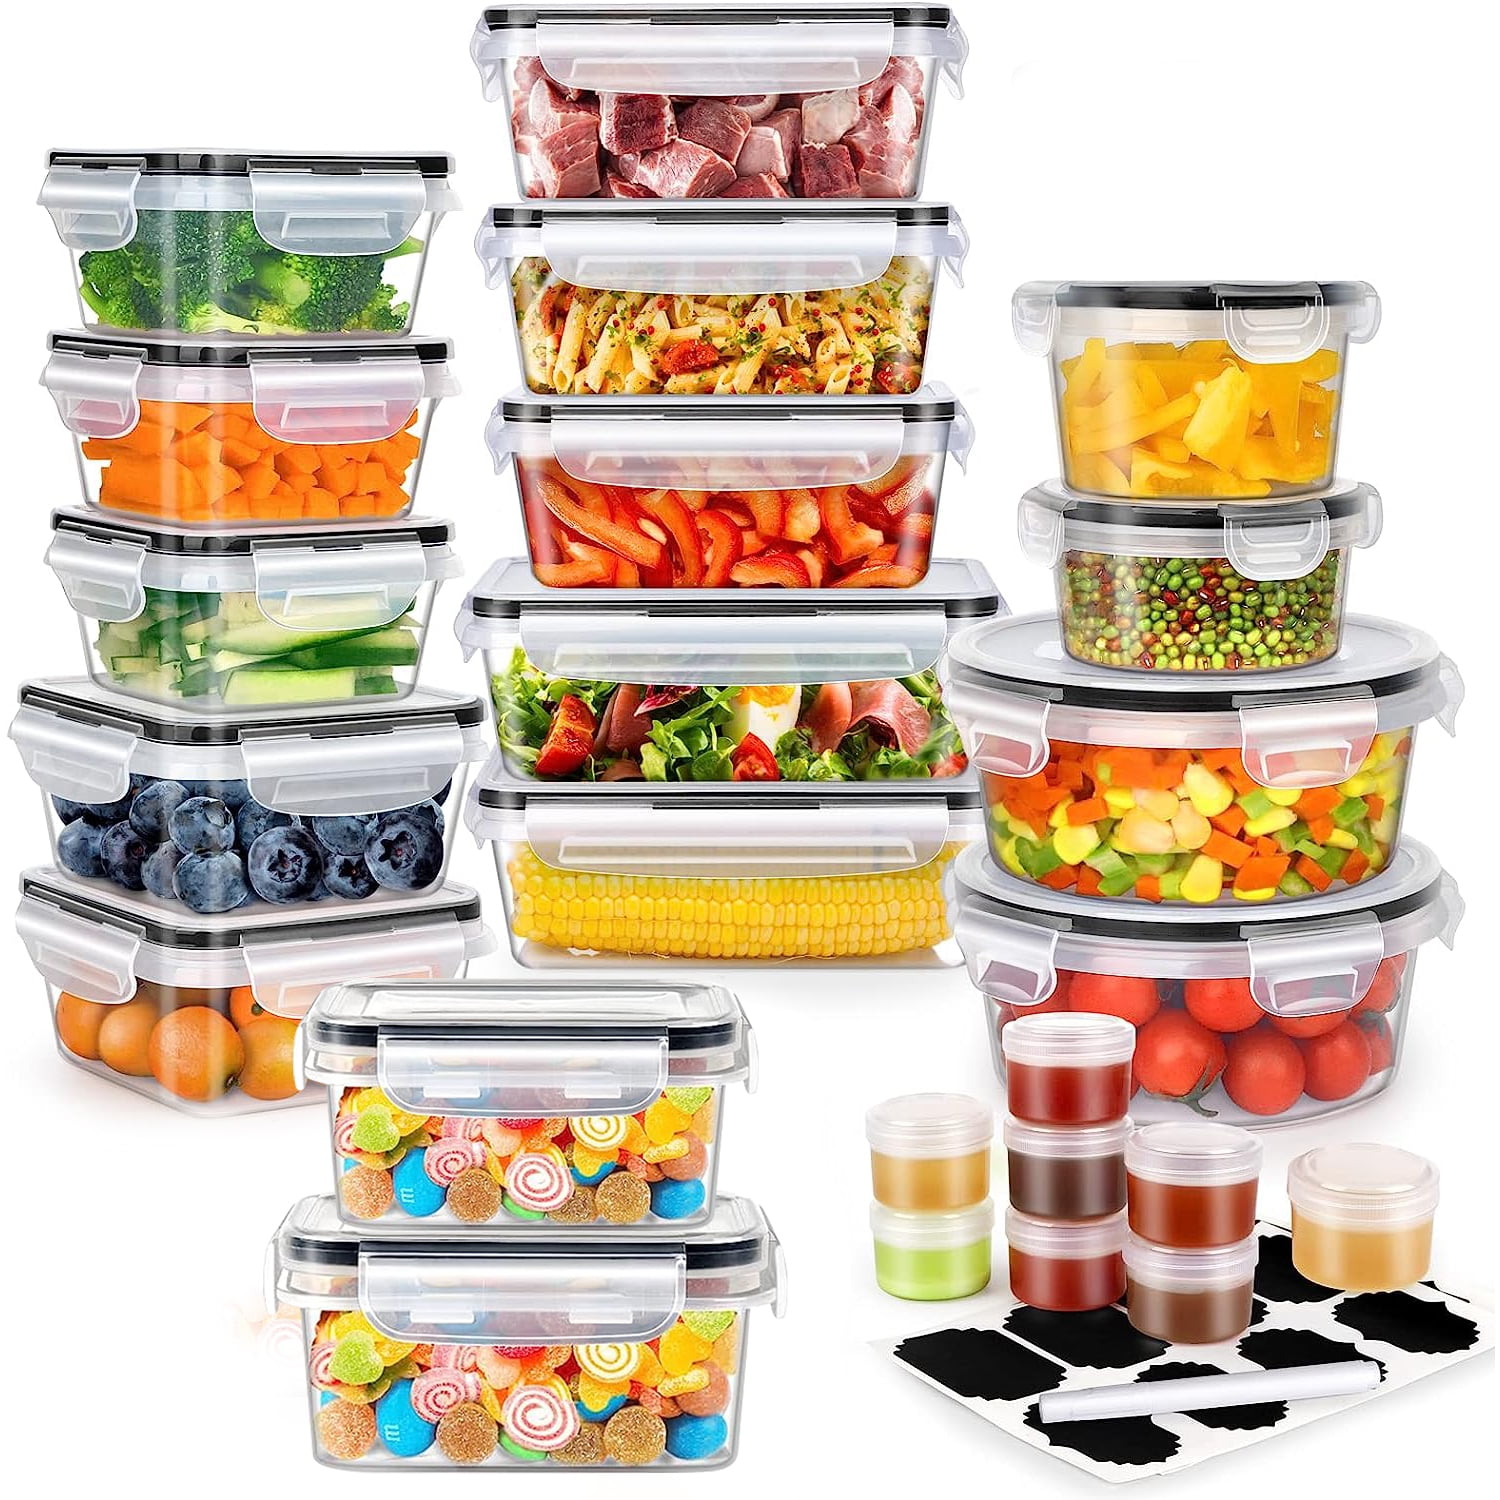 Nicole Home Collection 02050 Food Storage Round Container with Lid, Clear, 10 oz - 7 count